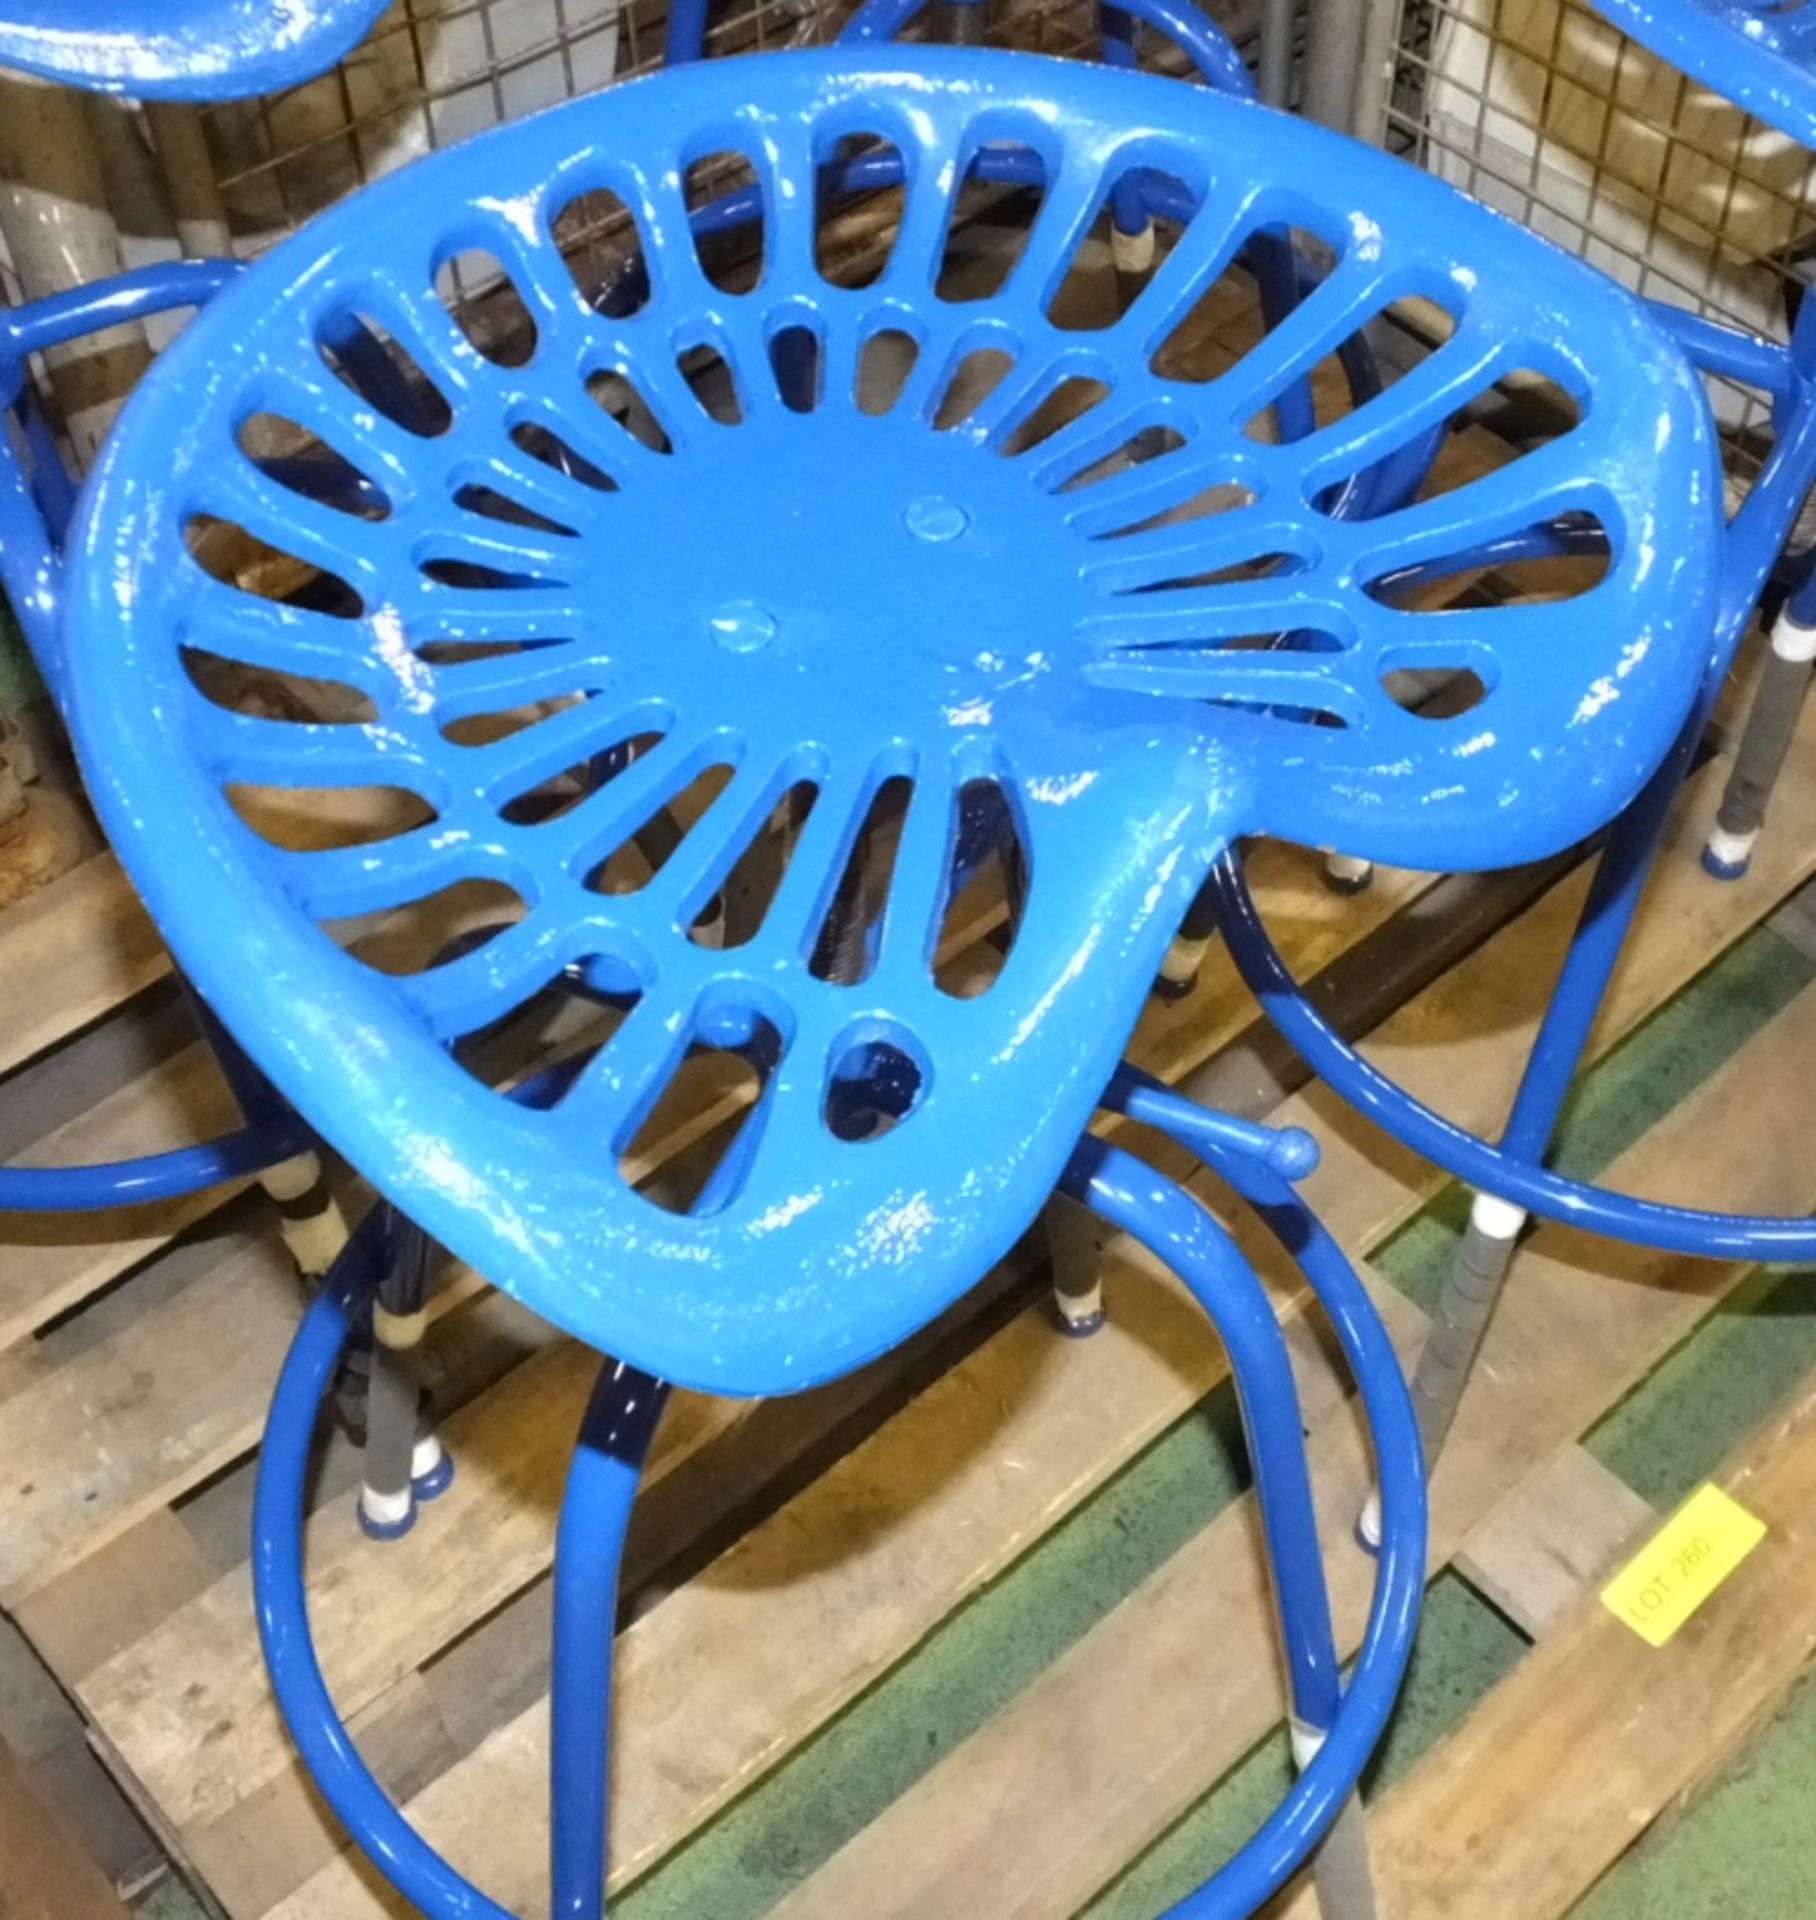 4x Cast screw height tractor seat style chairs - Image 3 of 3